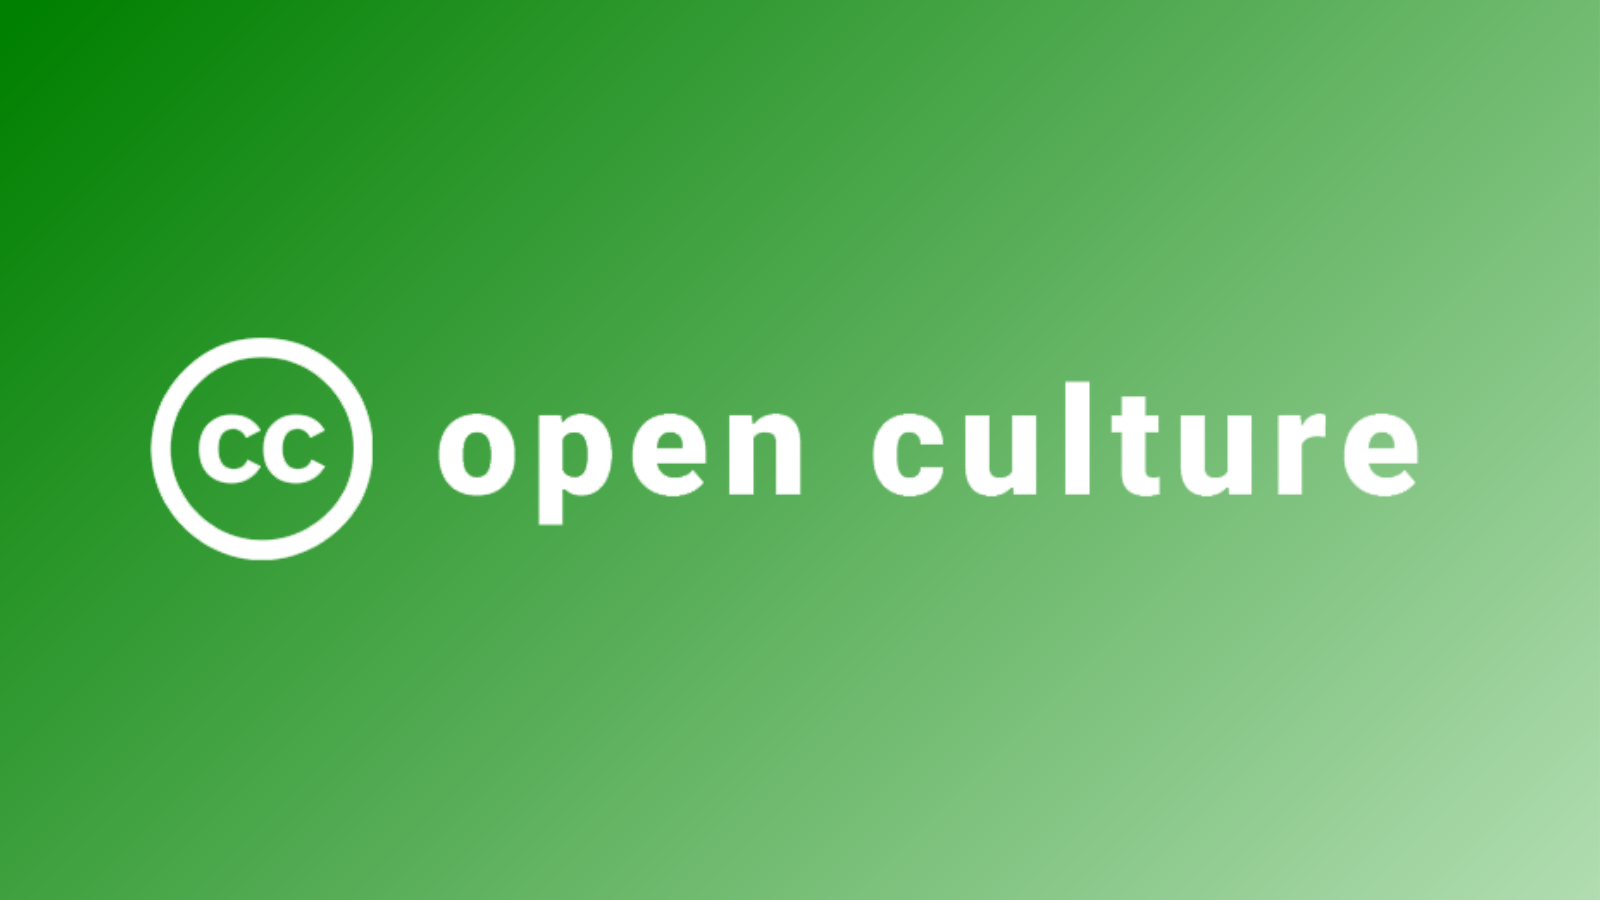 The Creative Commons icon and the words "open culture" in white over a green background fading to white in the bottom right corner.